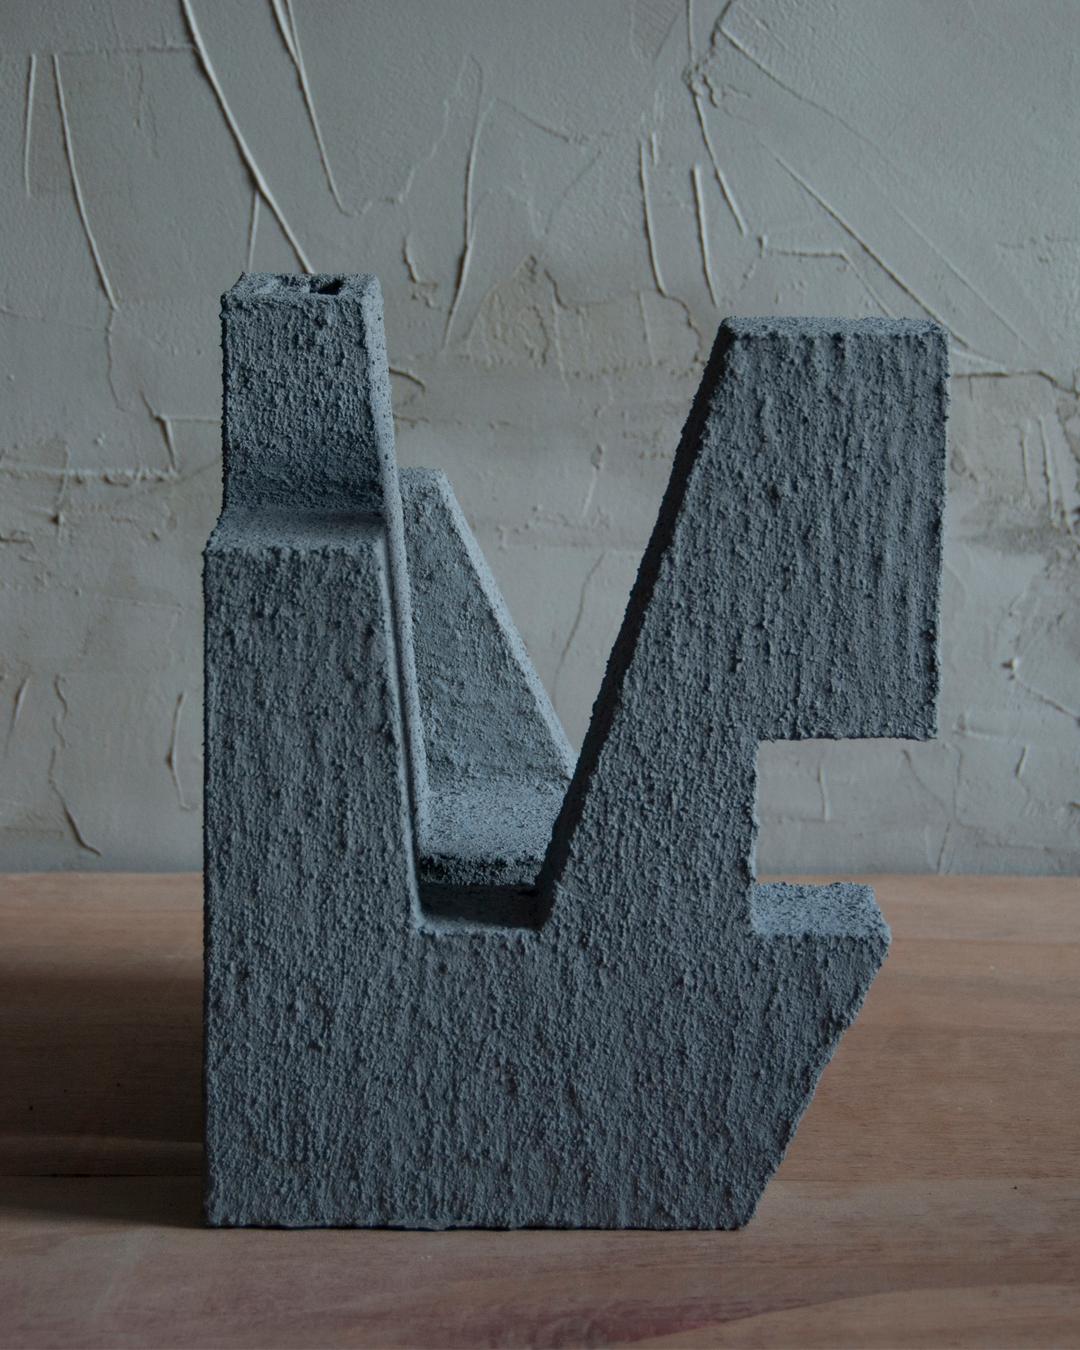 Hand-Crafted Sculpture Contemporary Geometric Constructivist Wood Concrete Grey- The Ship For Sale